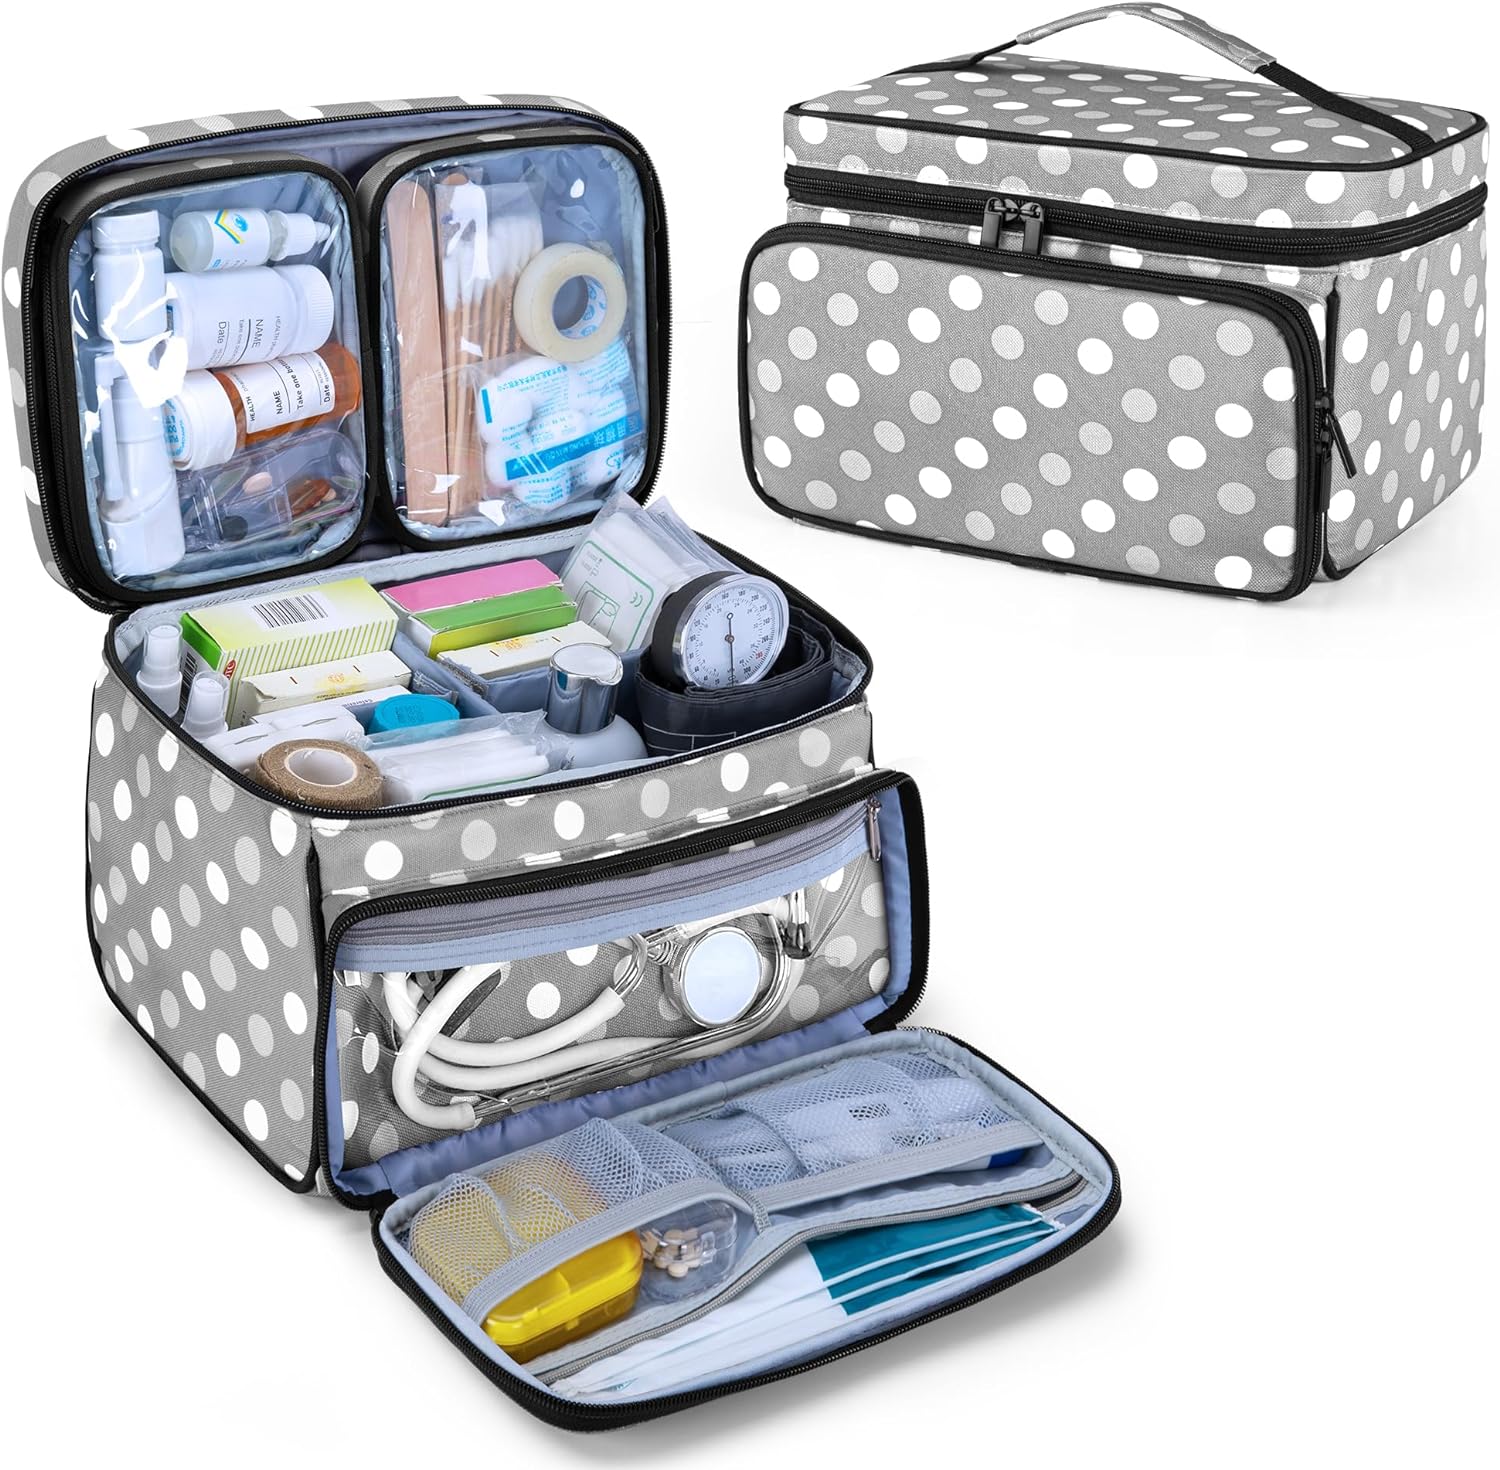 LUXJA Medicine Bag with 2 Detachable Clear Pouches, Pill Bottle Organizer with Detachable Dividers (Suitable for Home or Travel Use), Gray Dots